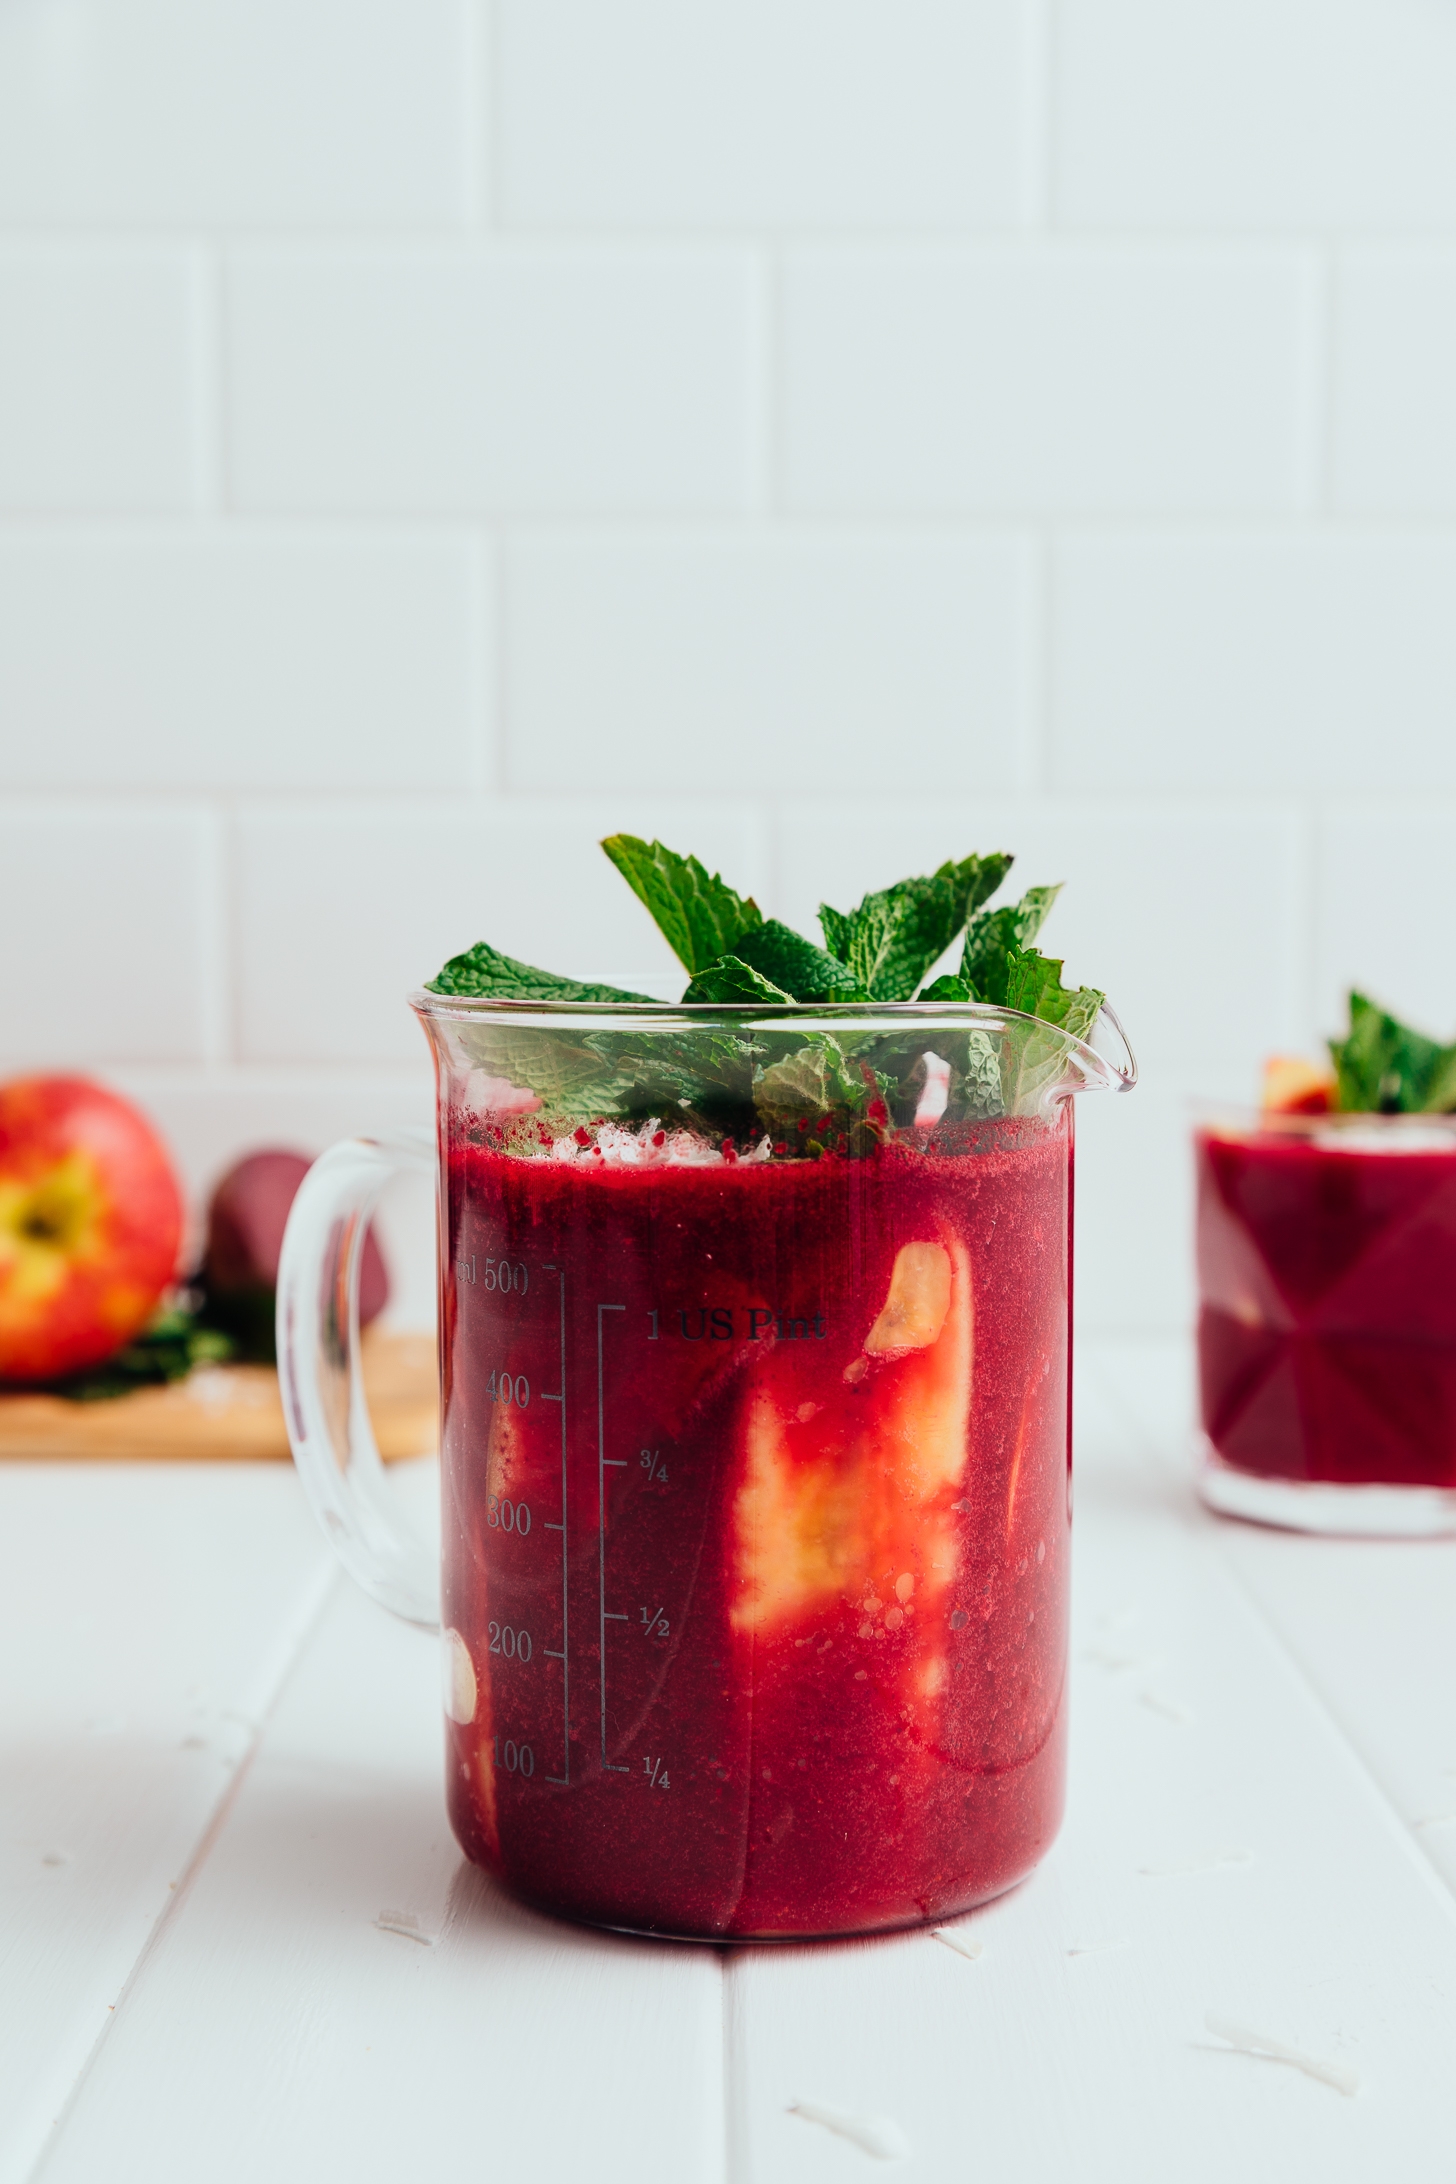 Measuring glass filled with our Beet and Berry Smoothie recipe topped with fresh mint